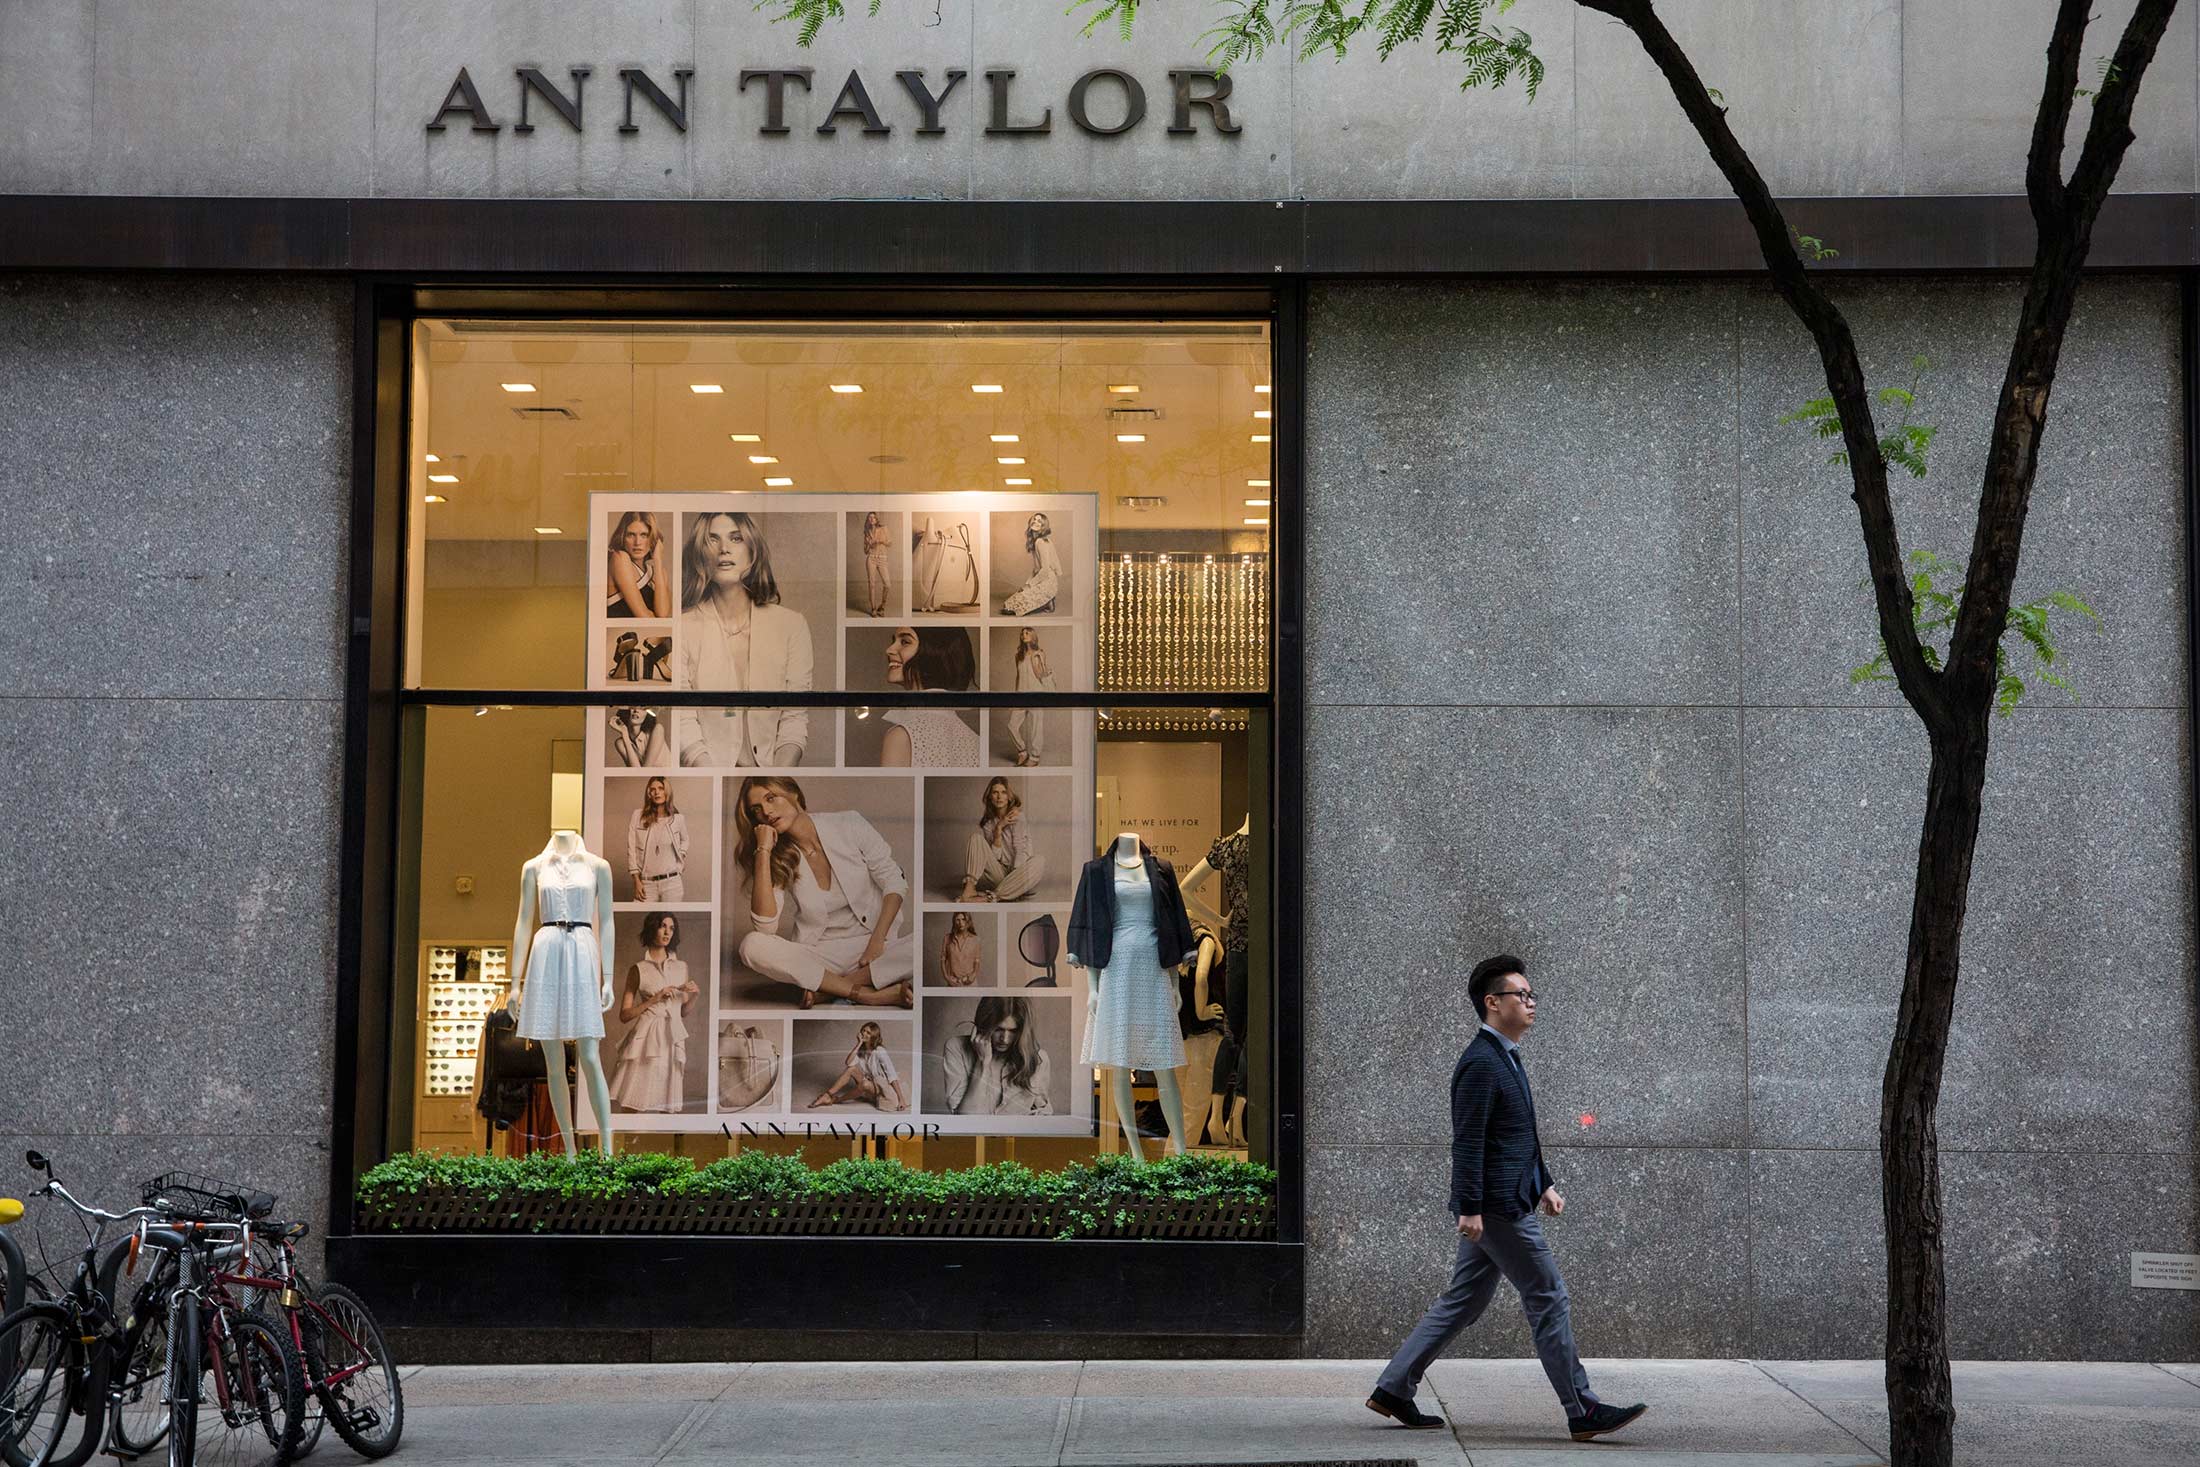 People pass the window display of an Ann Taylor women's clothing store in Manhattan.
